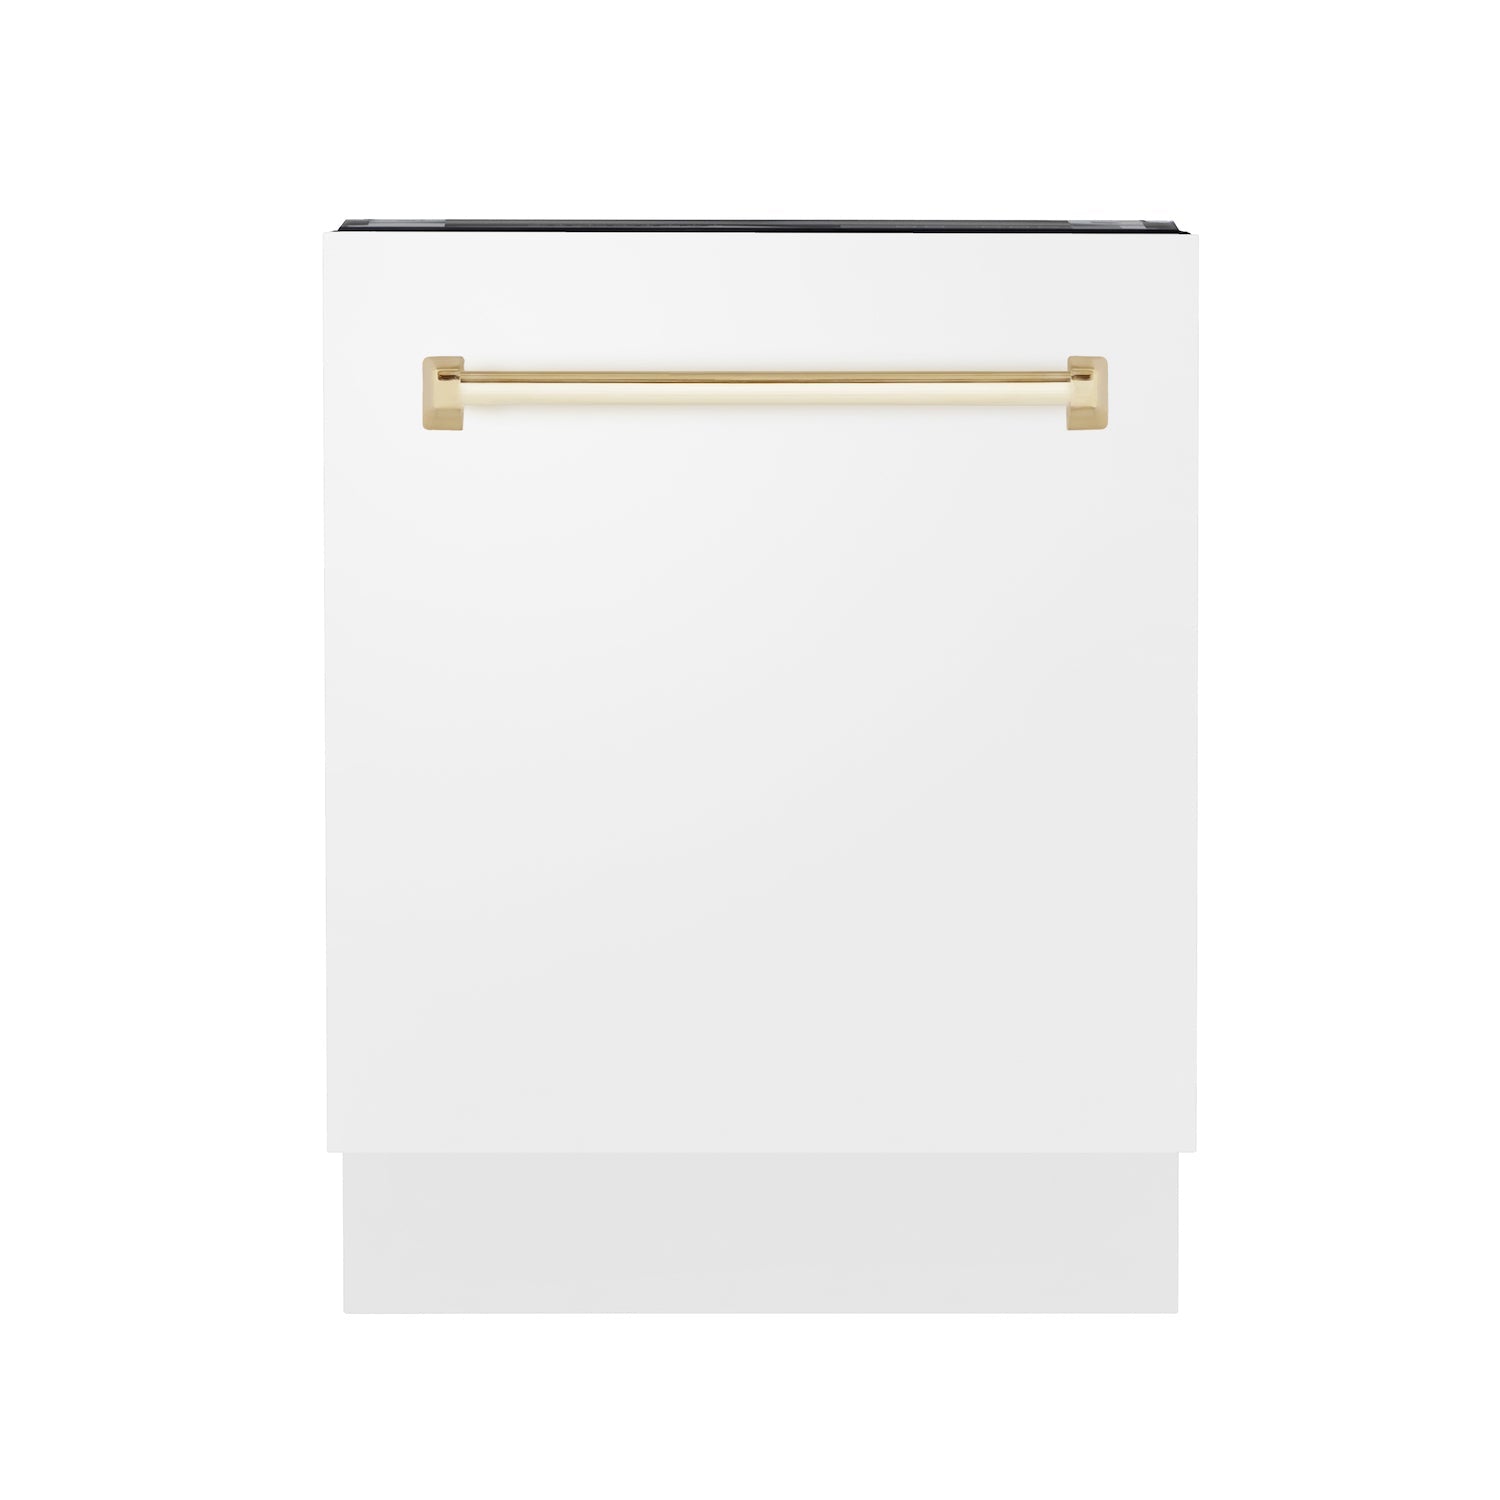 ZLINE Autograph Edition 24 in. 3rd Rack Top Control Tall Tub Dishwasher in White Matte with Polished Gold Accent Handle, 51dBa (DWVZ-WM-24-G) front.